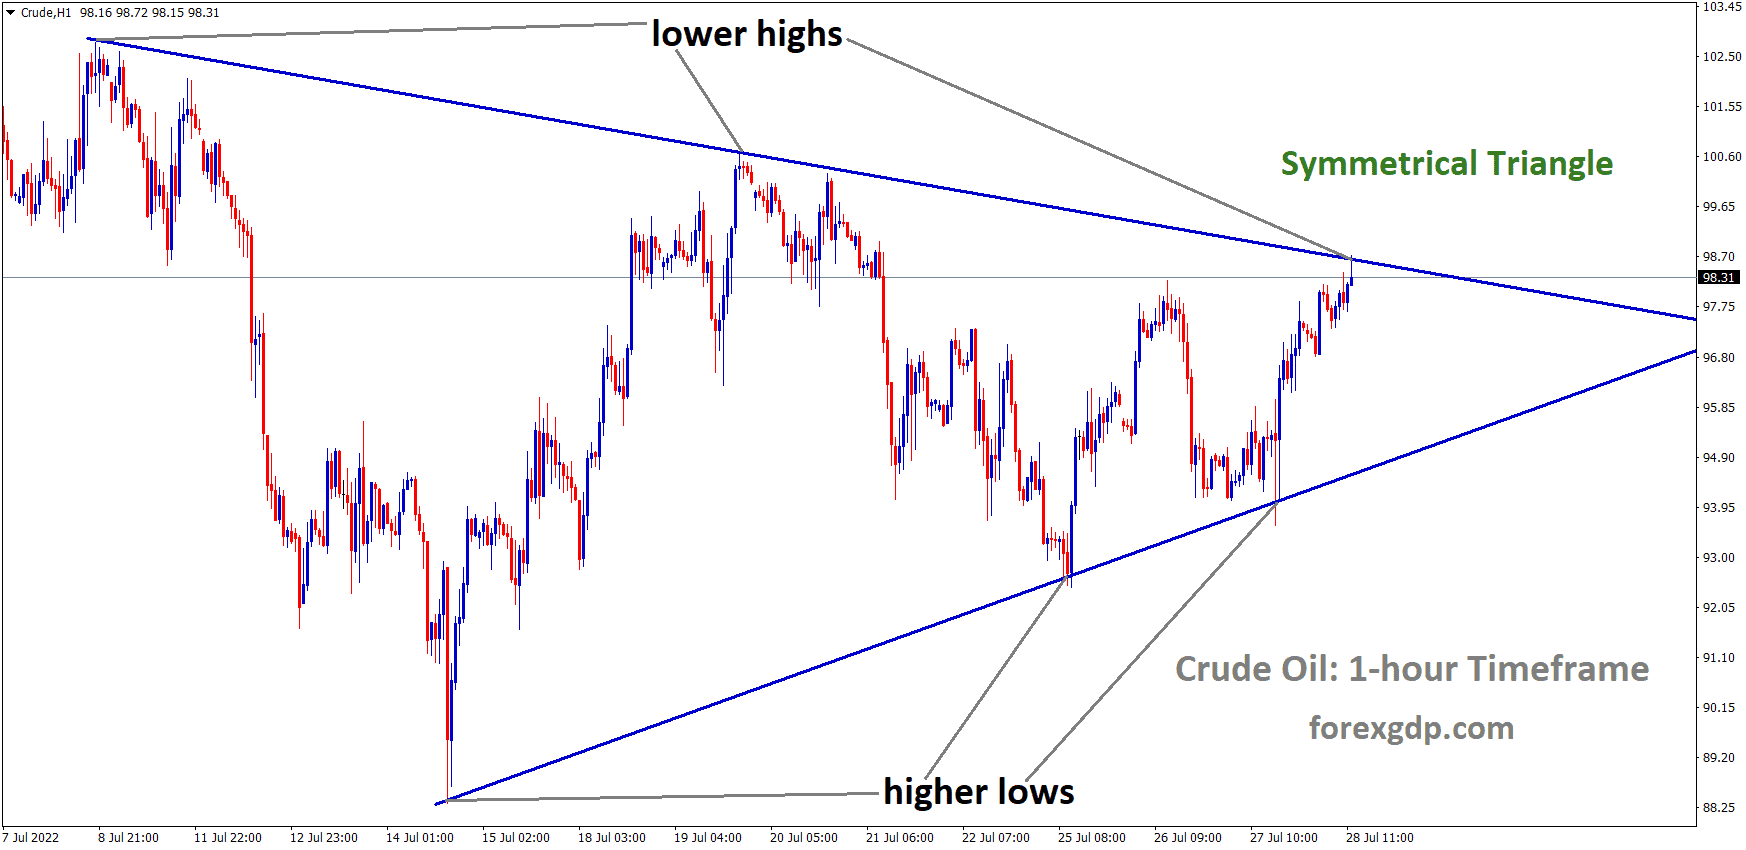 Crude Oil is moving in the Symmetrical triangle pattern and the Market has reached the Lower high area of the Triangle pattern